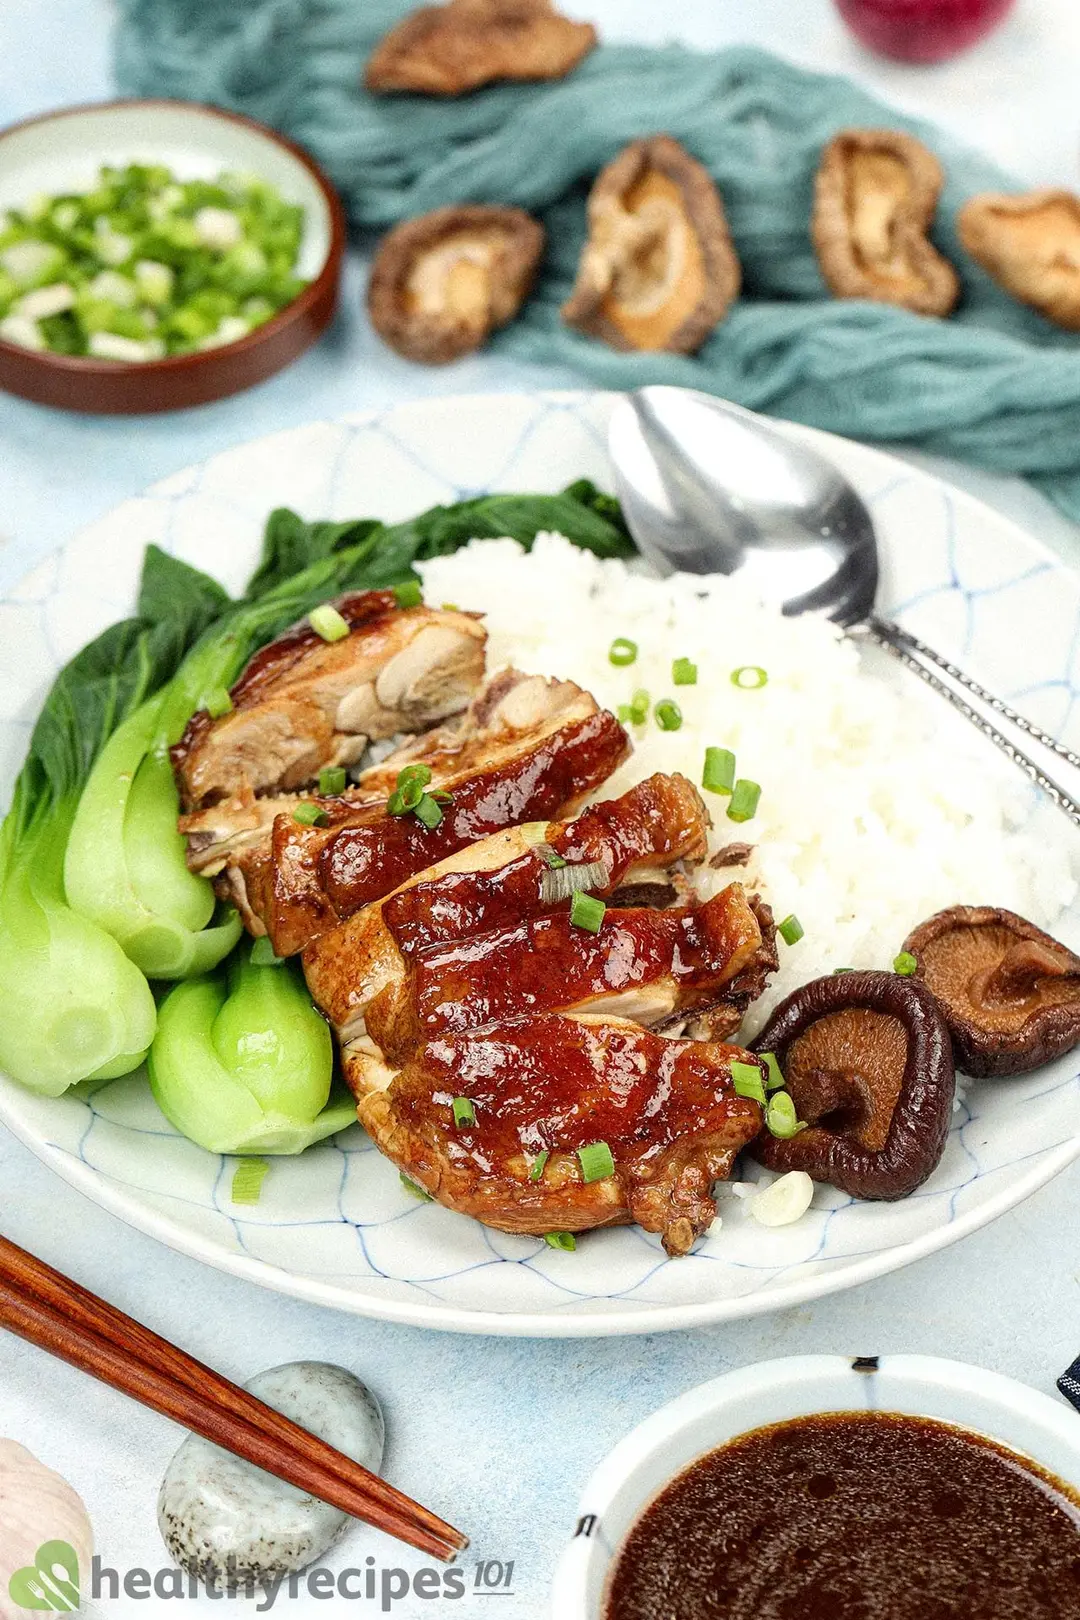 A plate of Asian food, containing rice, pieces of chicken, shiitake mushrooms, bok choy, chopped scallions, and a spoon